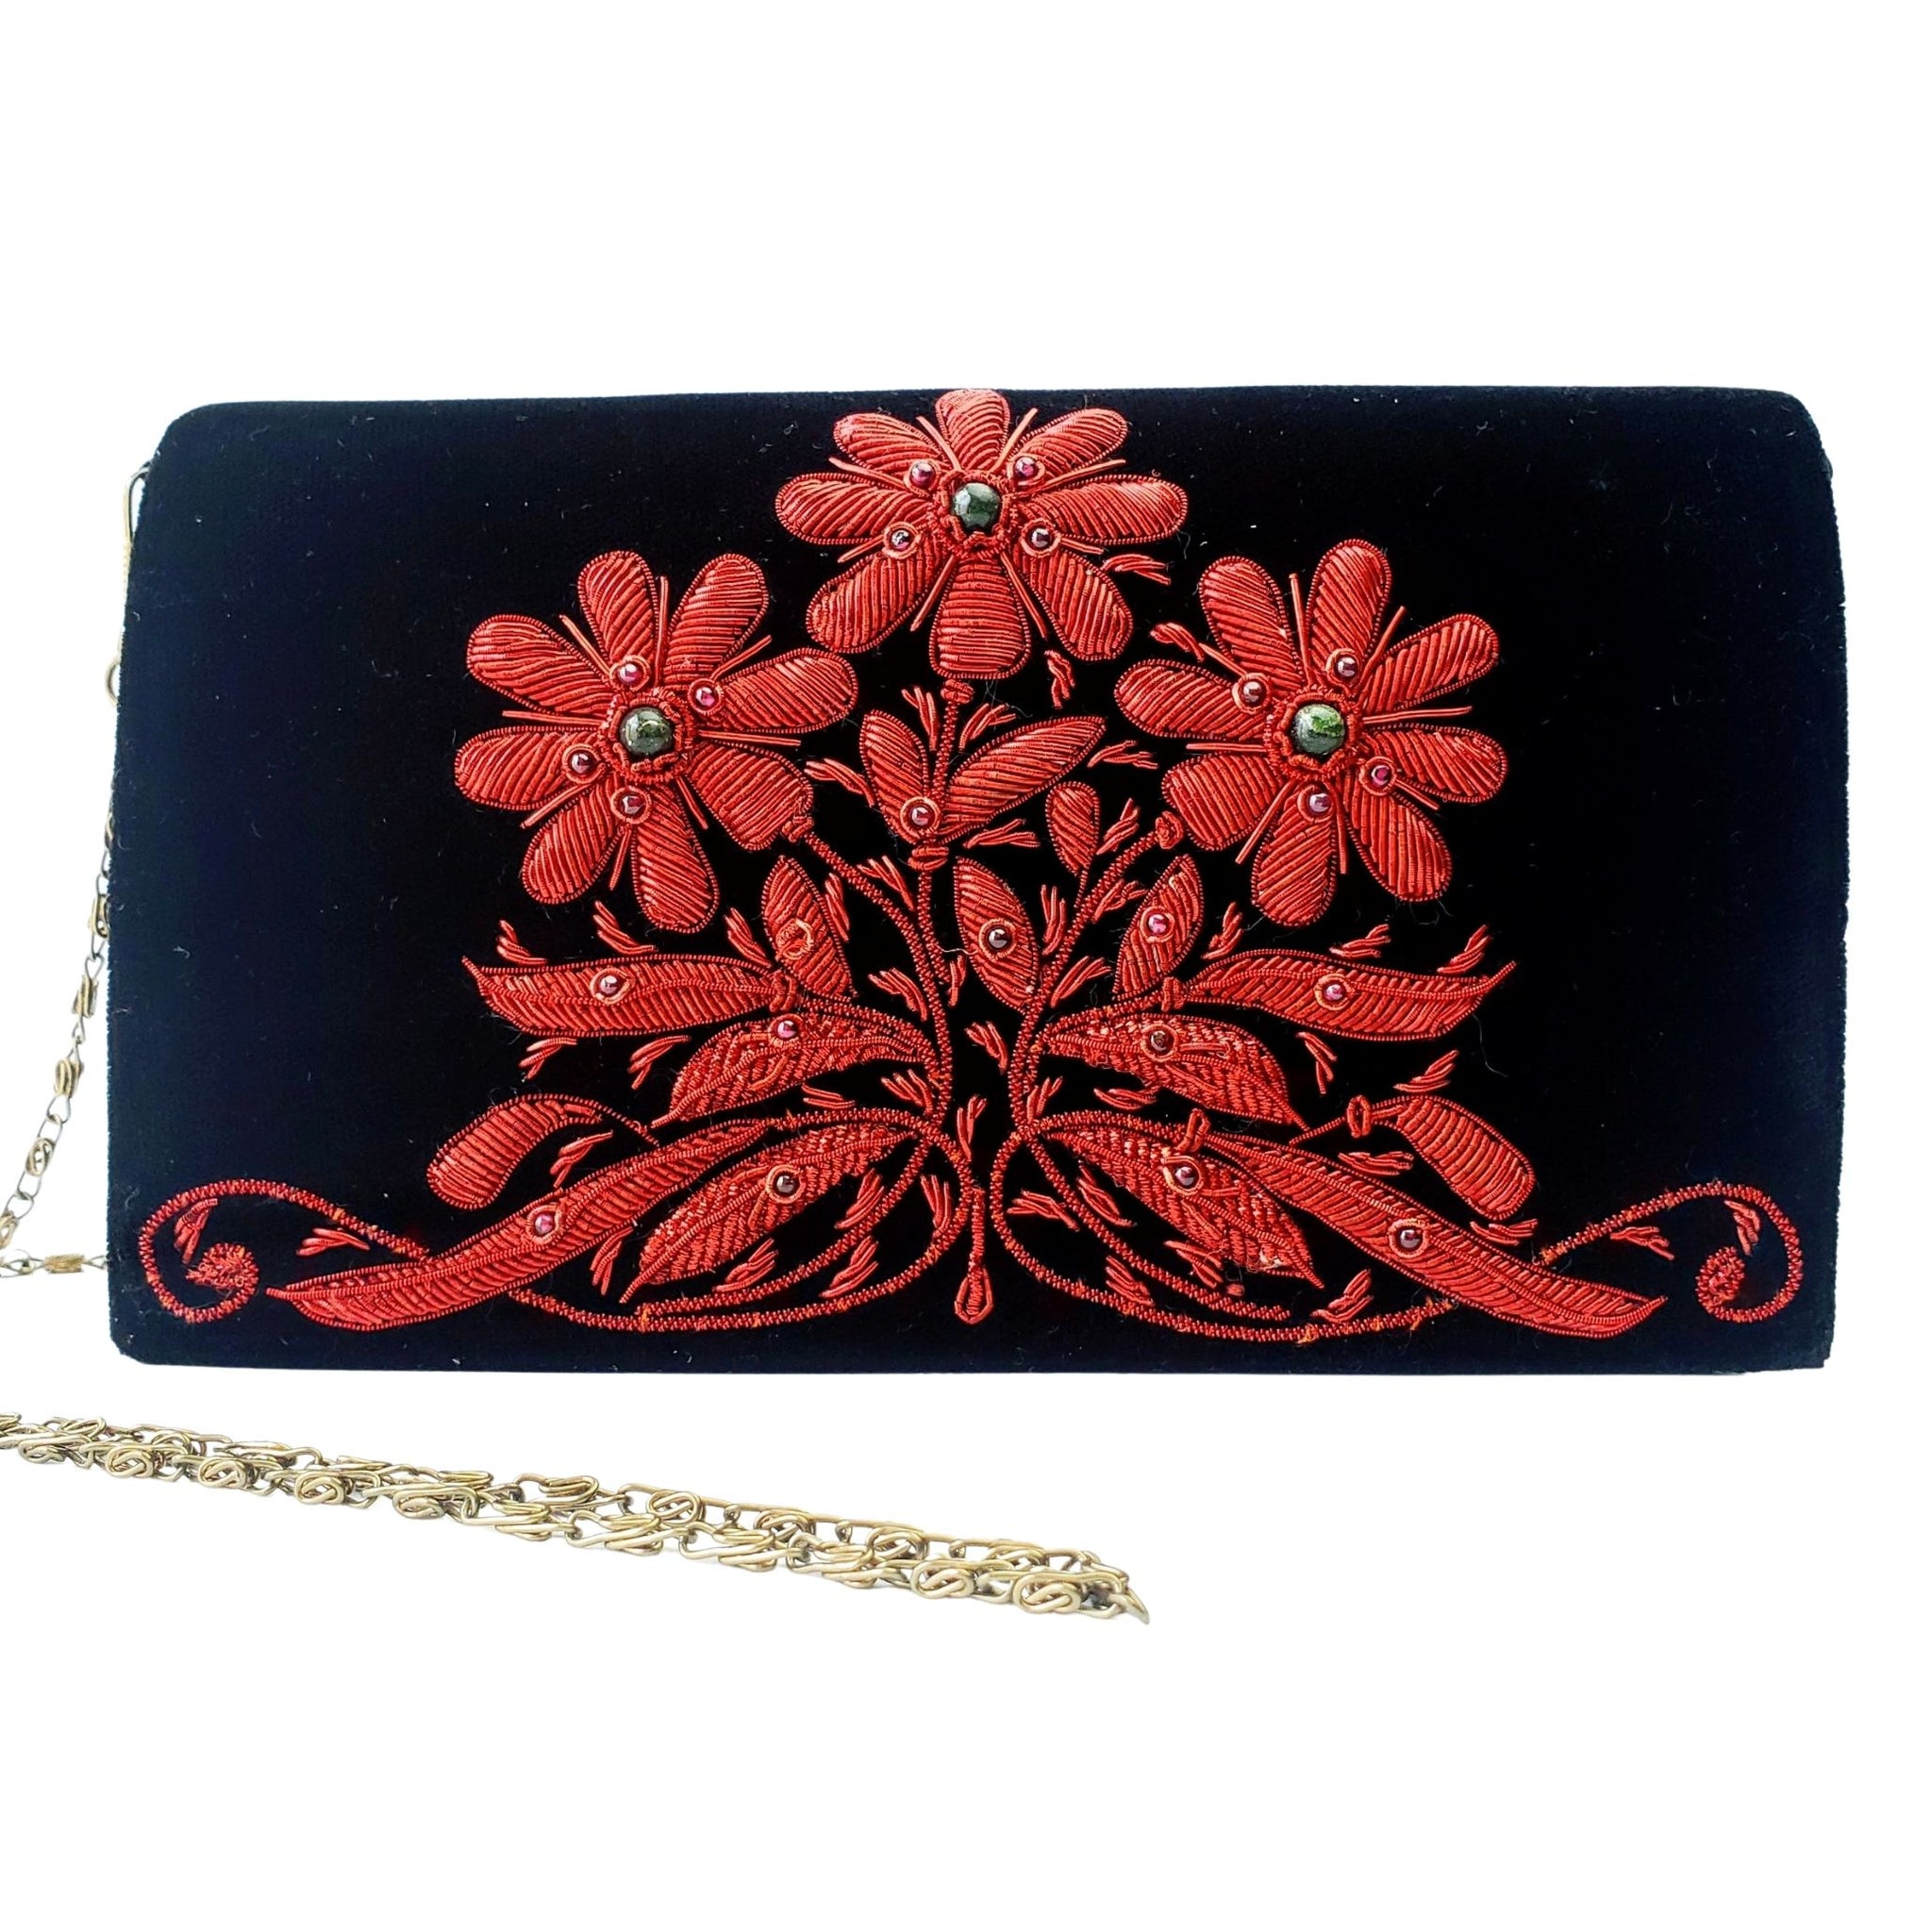 Velvet Emerald Green Clutch Purse, Bag Embroidered With Faux Diamonds,  Shoulder Strap and Handle for Wedding, Evening Party and Ethnic Wear. - Etsy